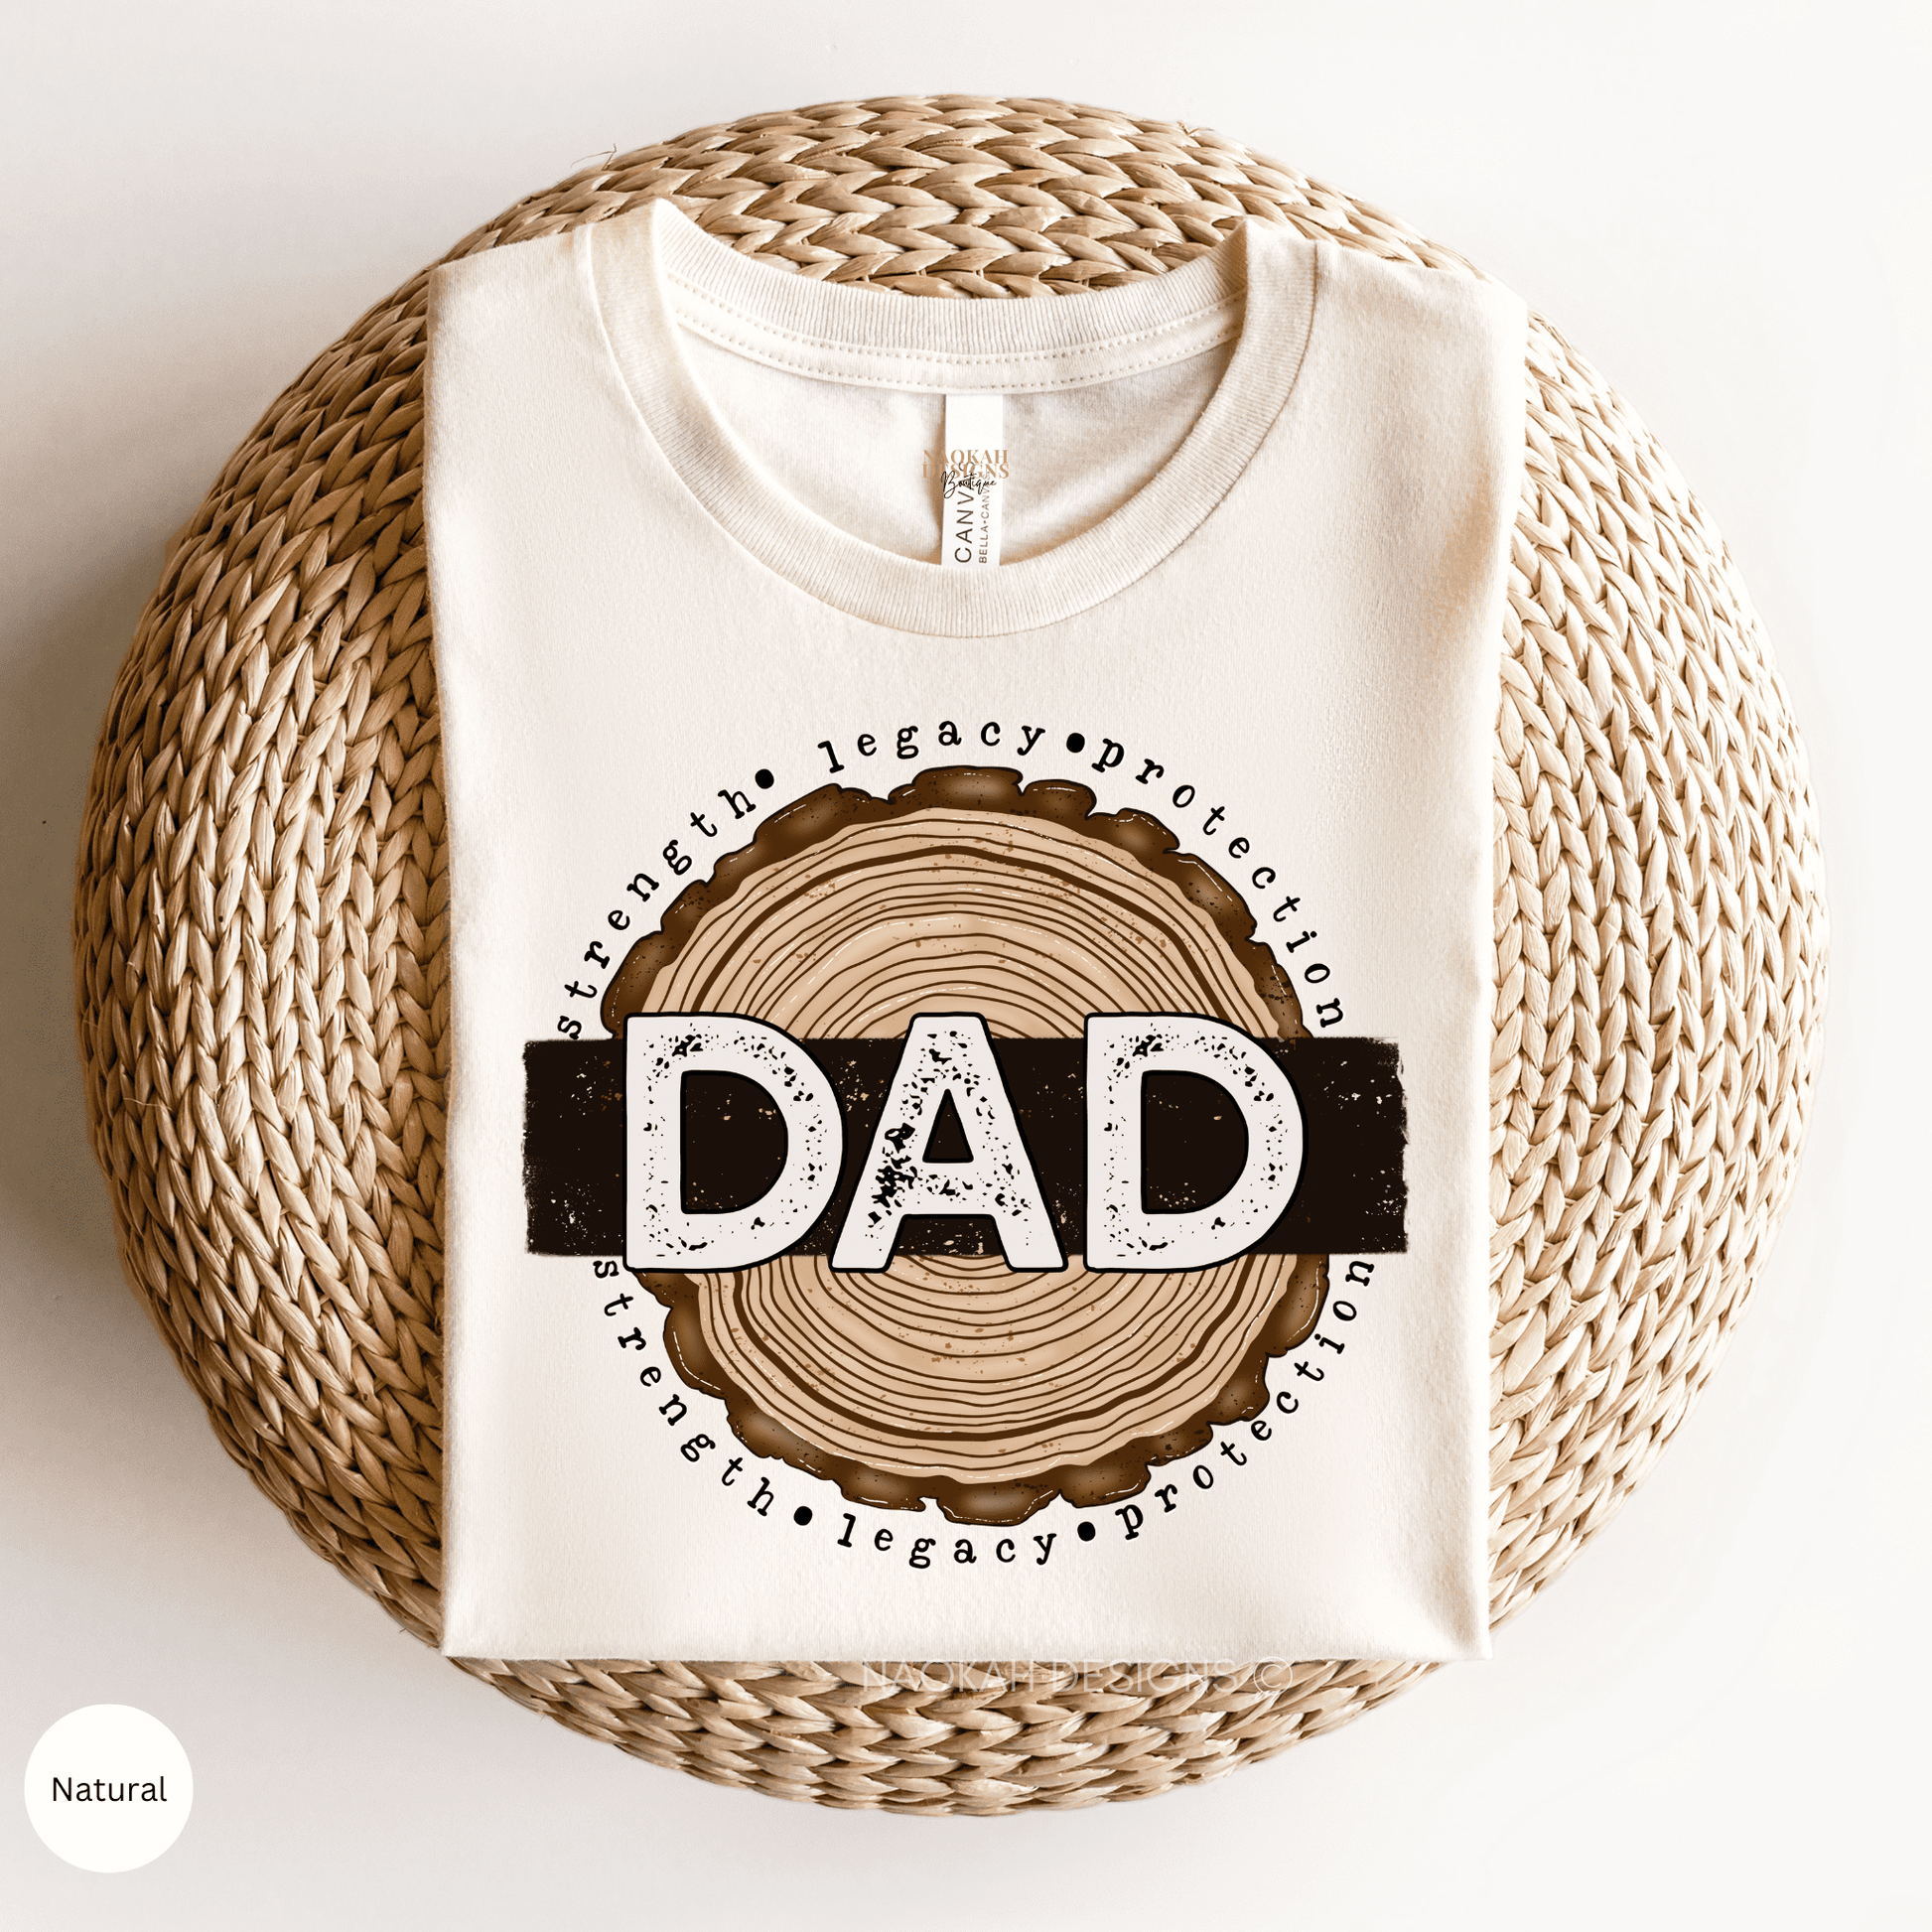 Dad Shirt, Best Dad Ever Shirt, Fathers Day Gift Shirt, Fathers Day Gift, New Dad Shirt, Father's Day Shirt, Best Dad T-Shirt, Best Dad Gift, Dad Shirt